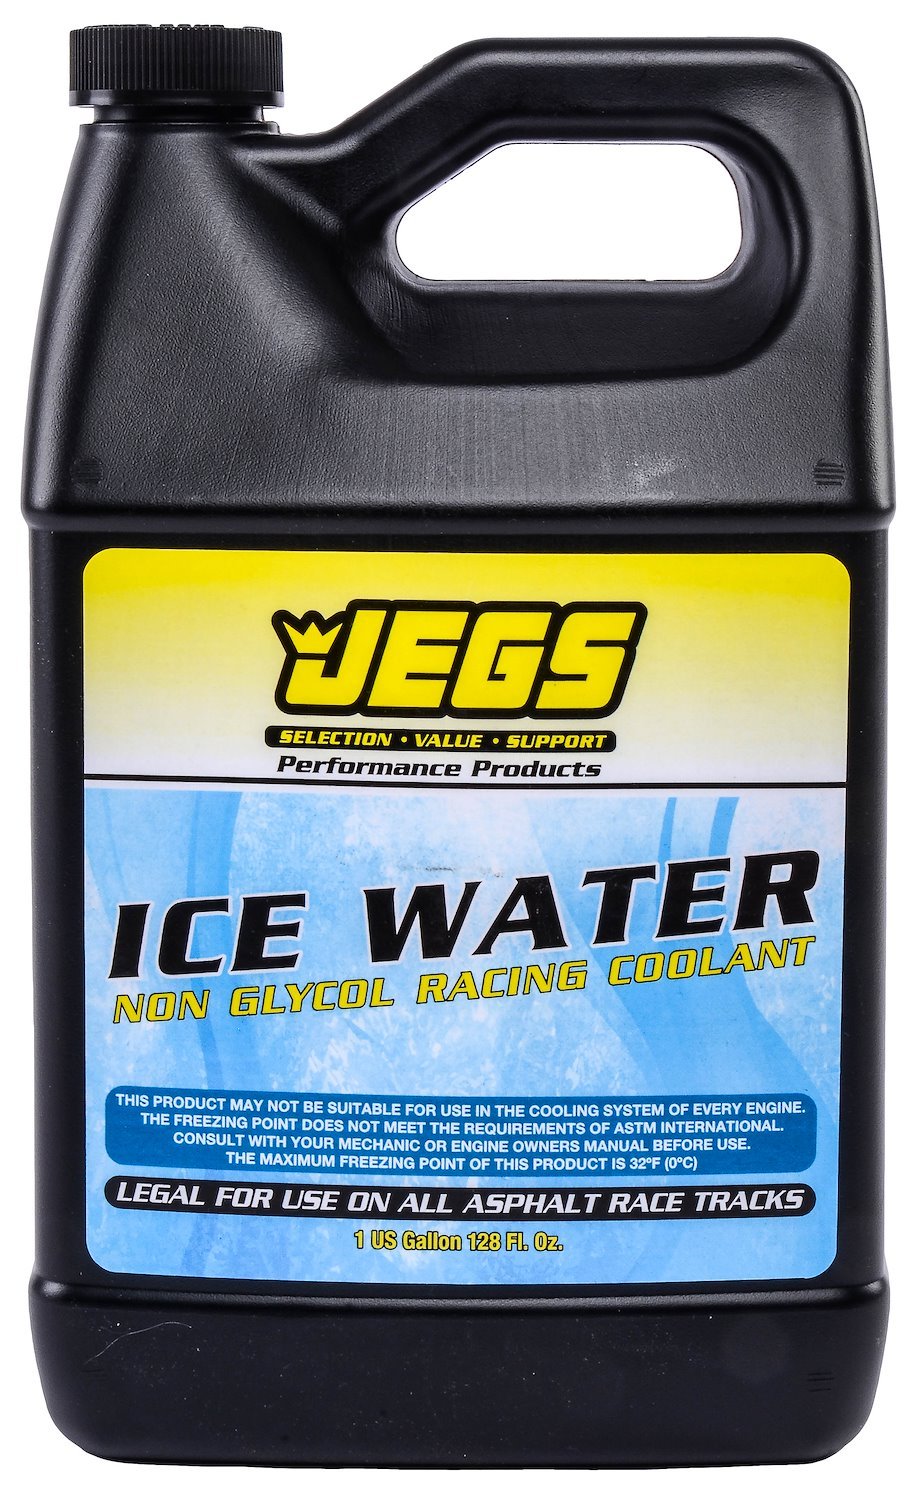 JEGS 555-72314 Ice Water Racing Coolant [1 Gallon, Non-Glycol] - JEGS